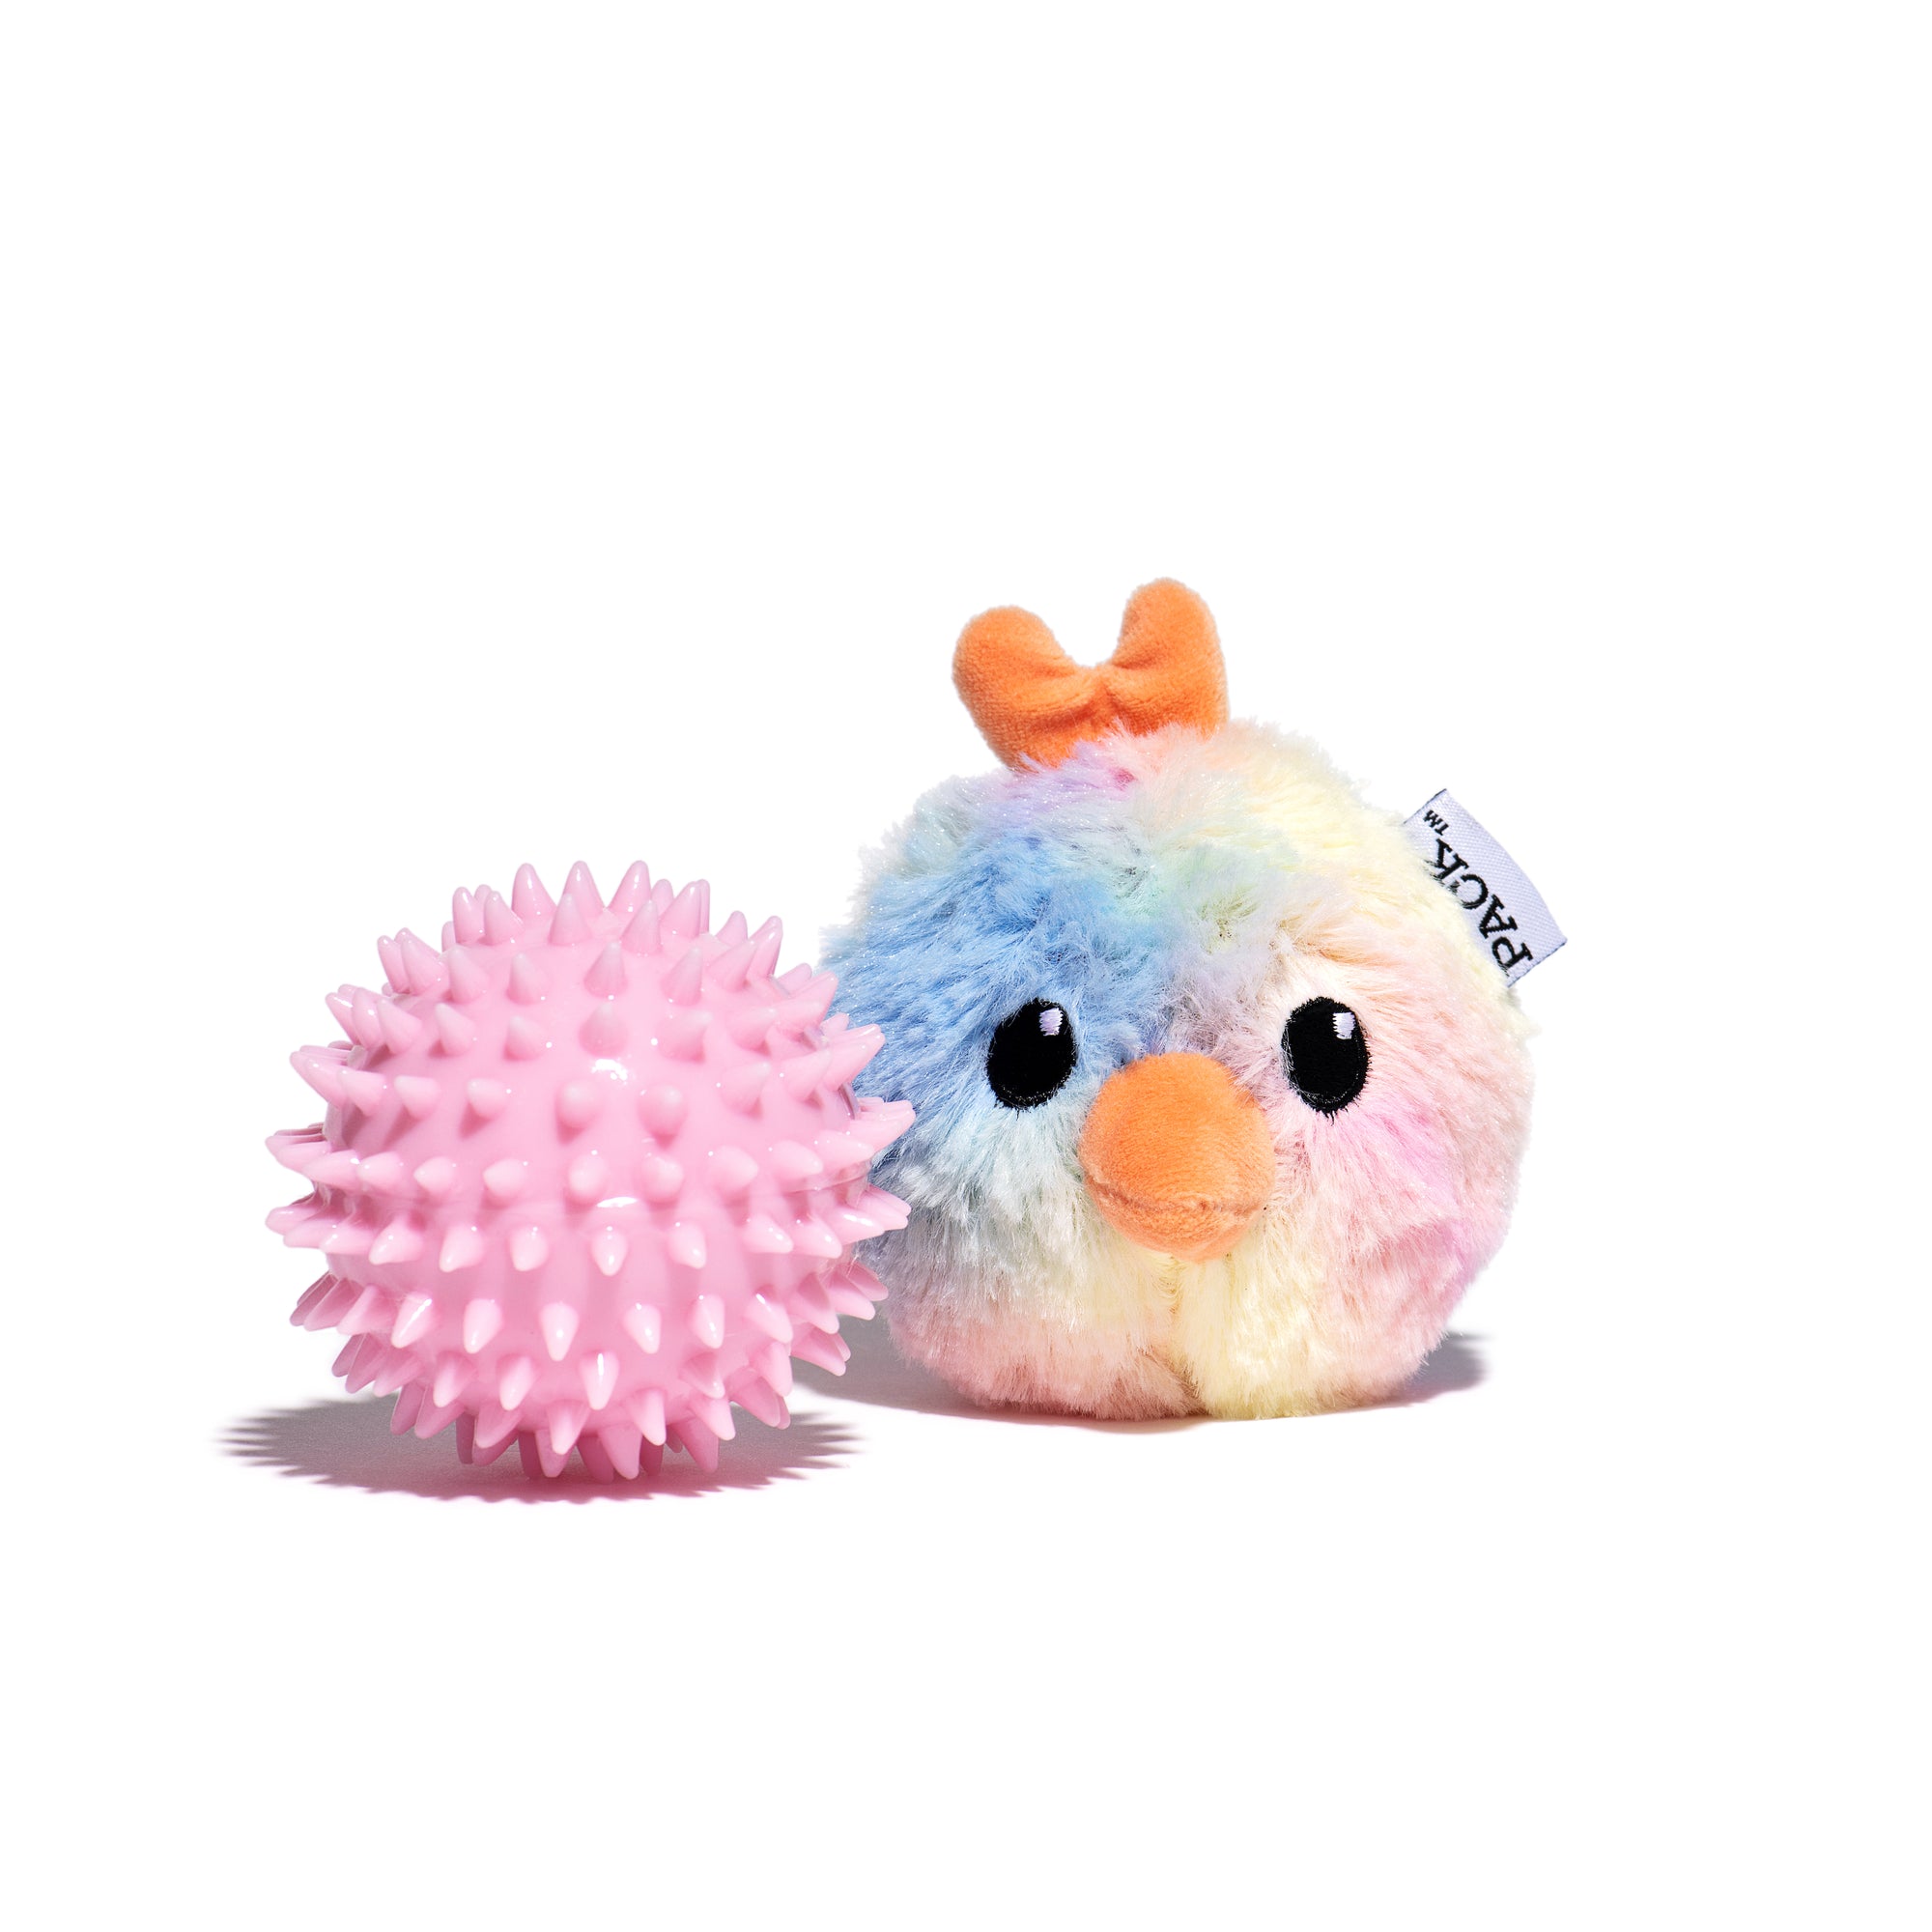 Mrs. Feathers (2-in-1 Toy)